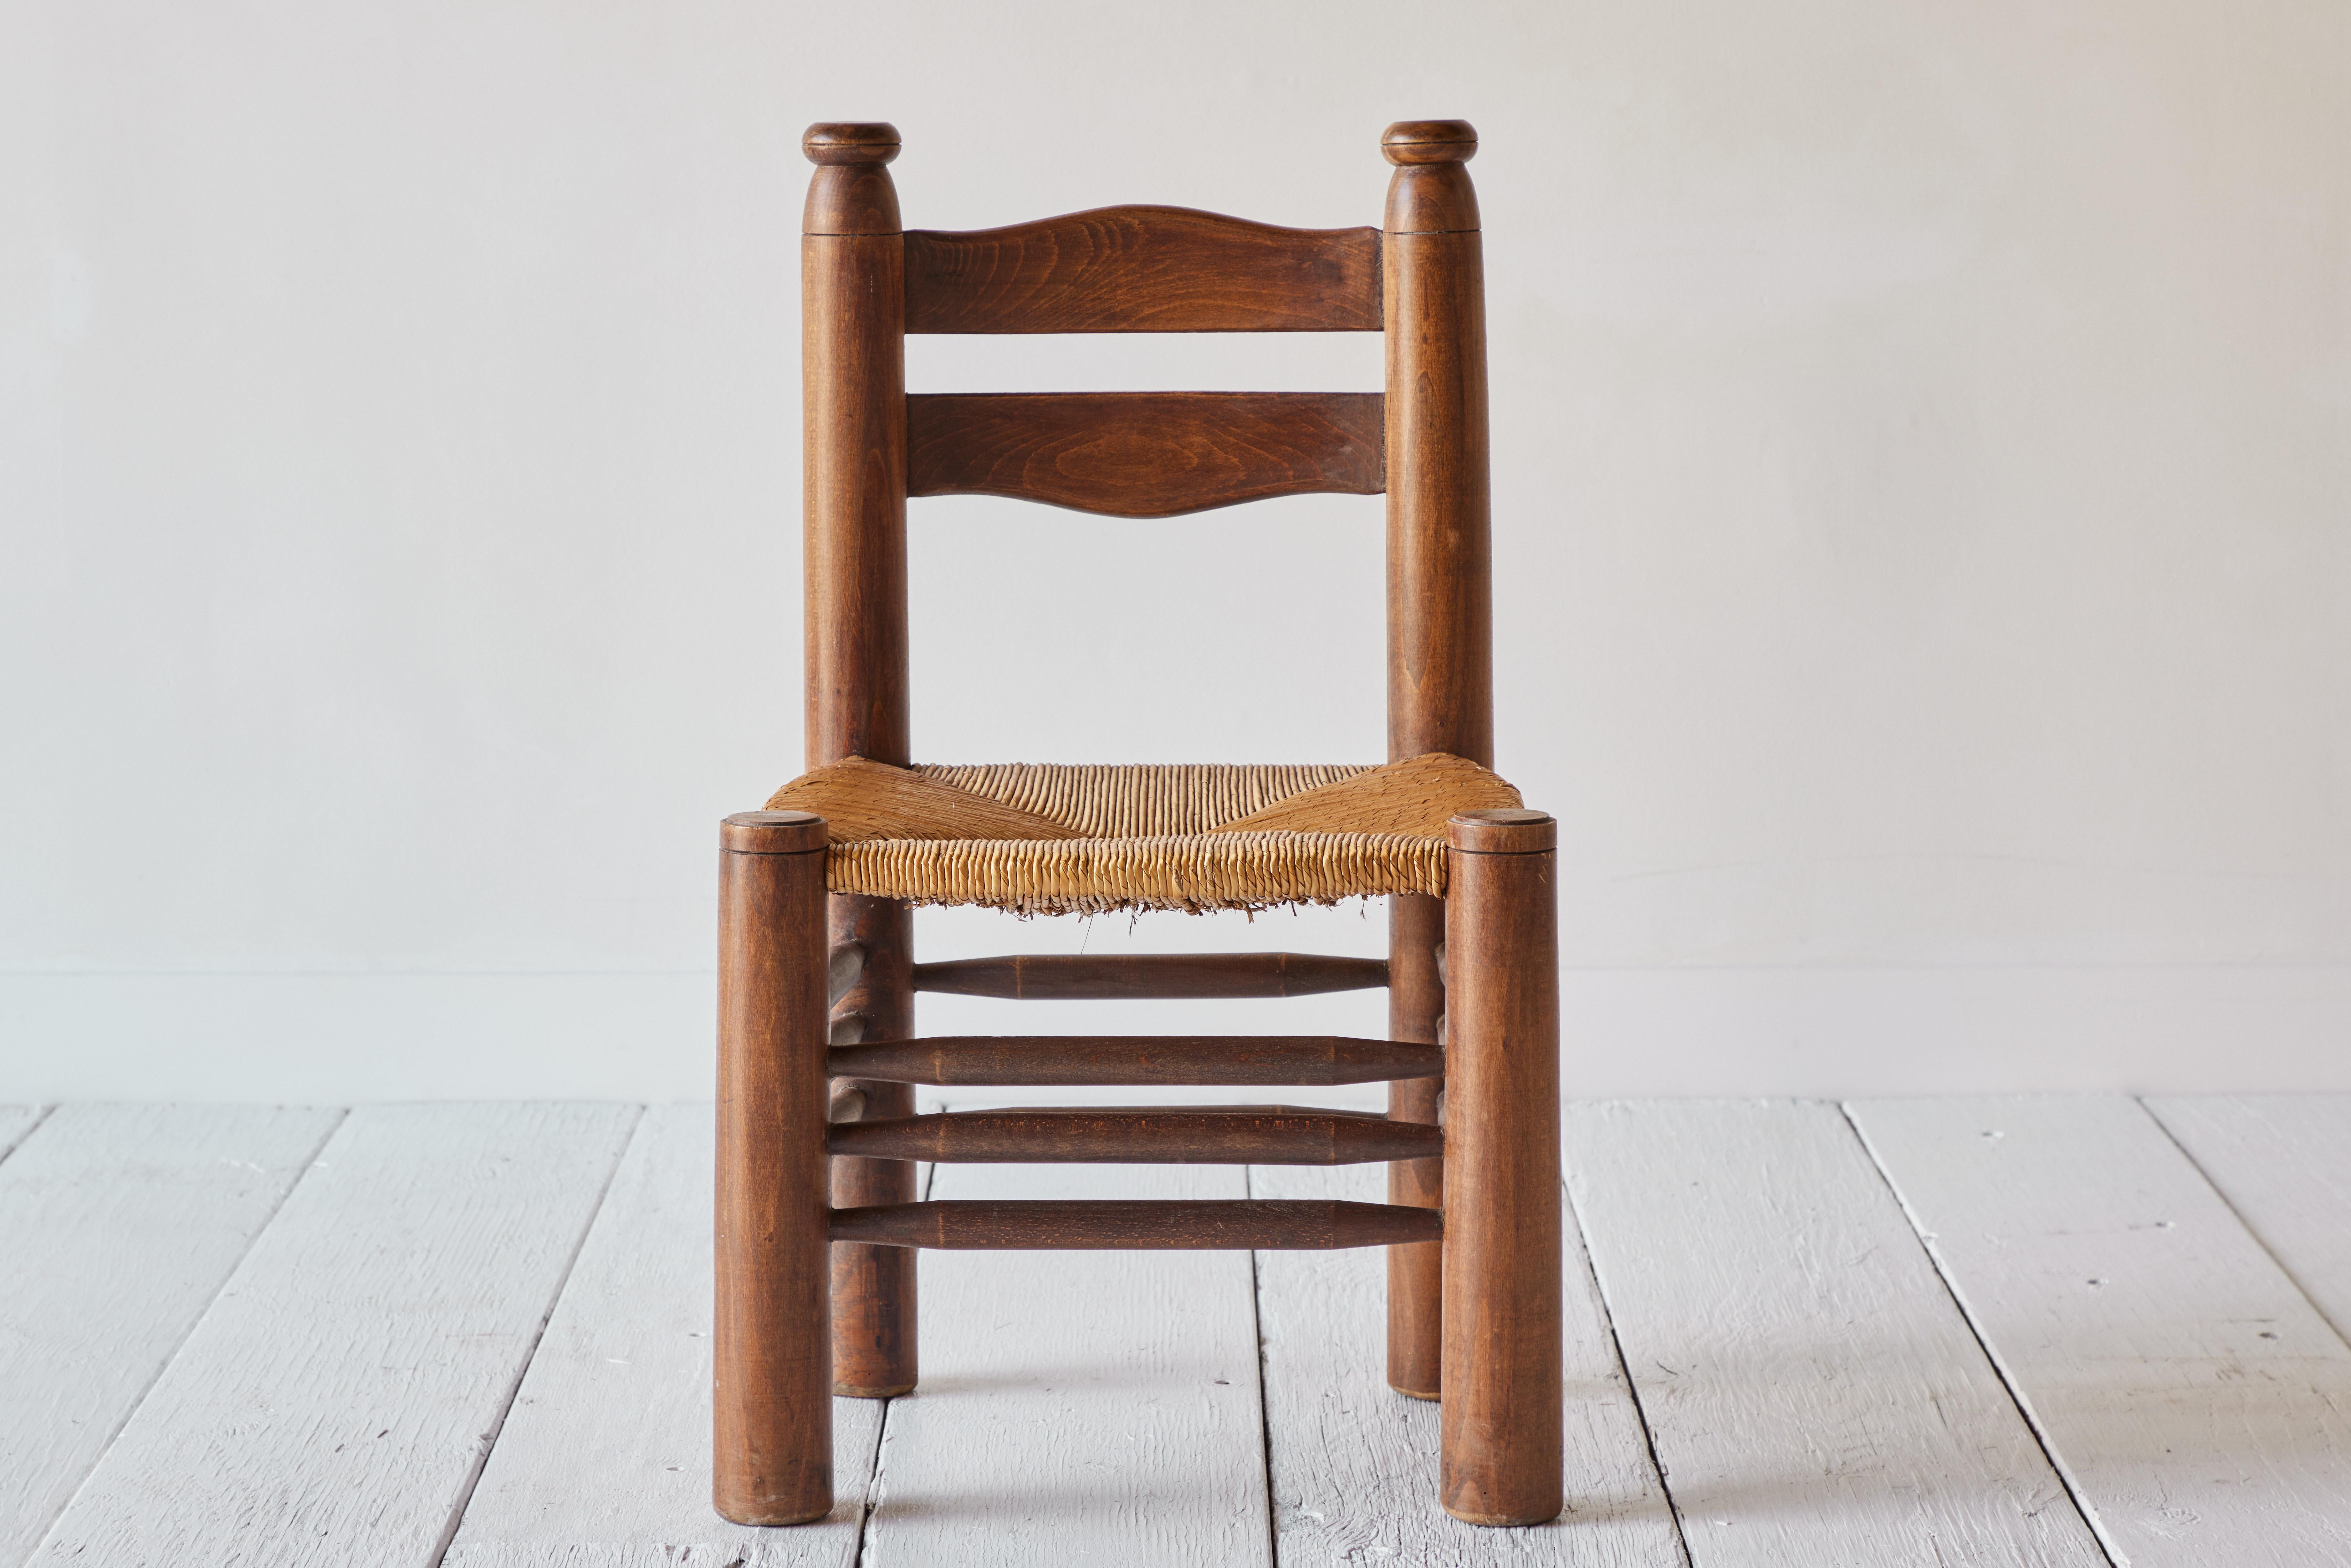 A wood rush chair in the manner of Charlotte Perriand's children’s chairs, circa 1950. We love the proportions of this chair and three stretchers between each leg. This chair is sound and solid in good vintage condition with minor signs of use and